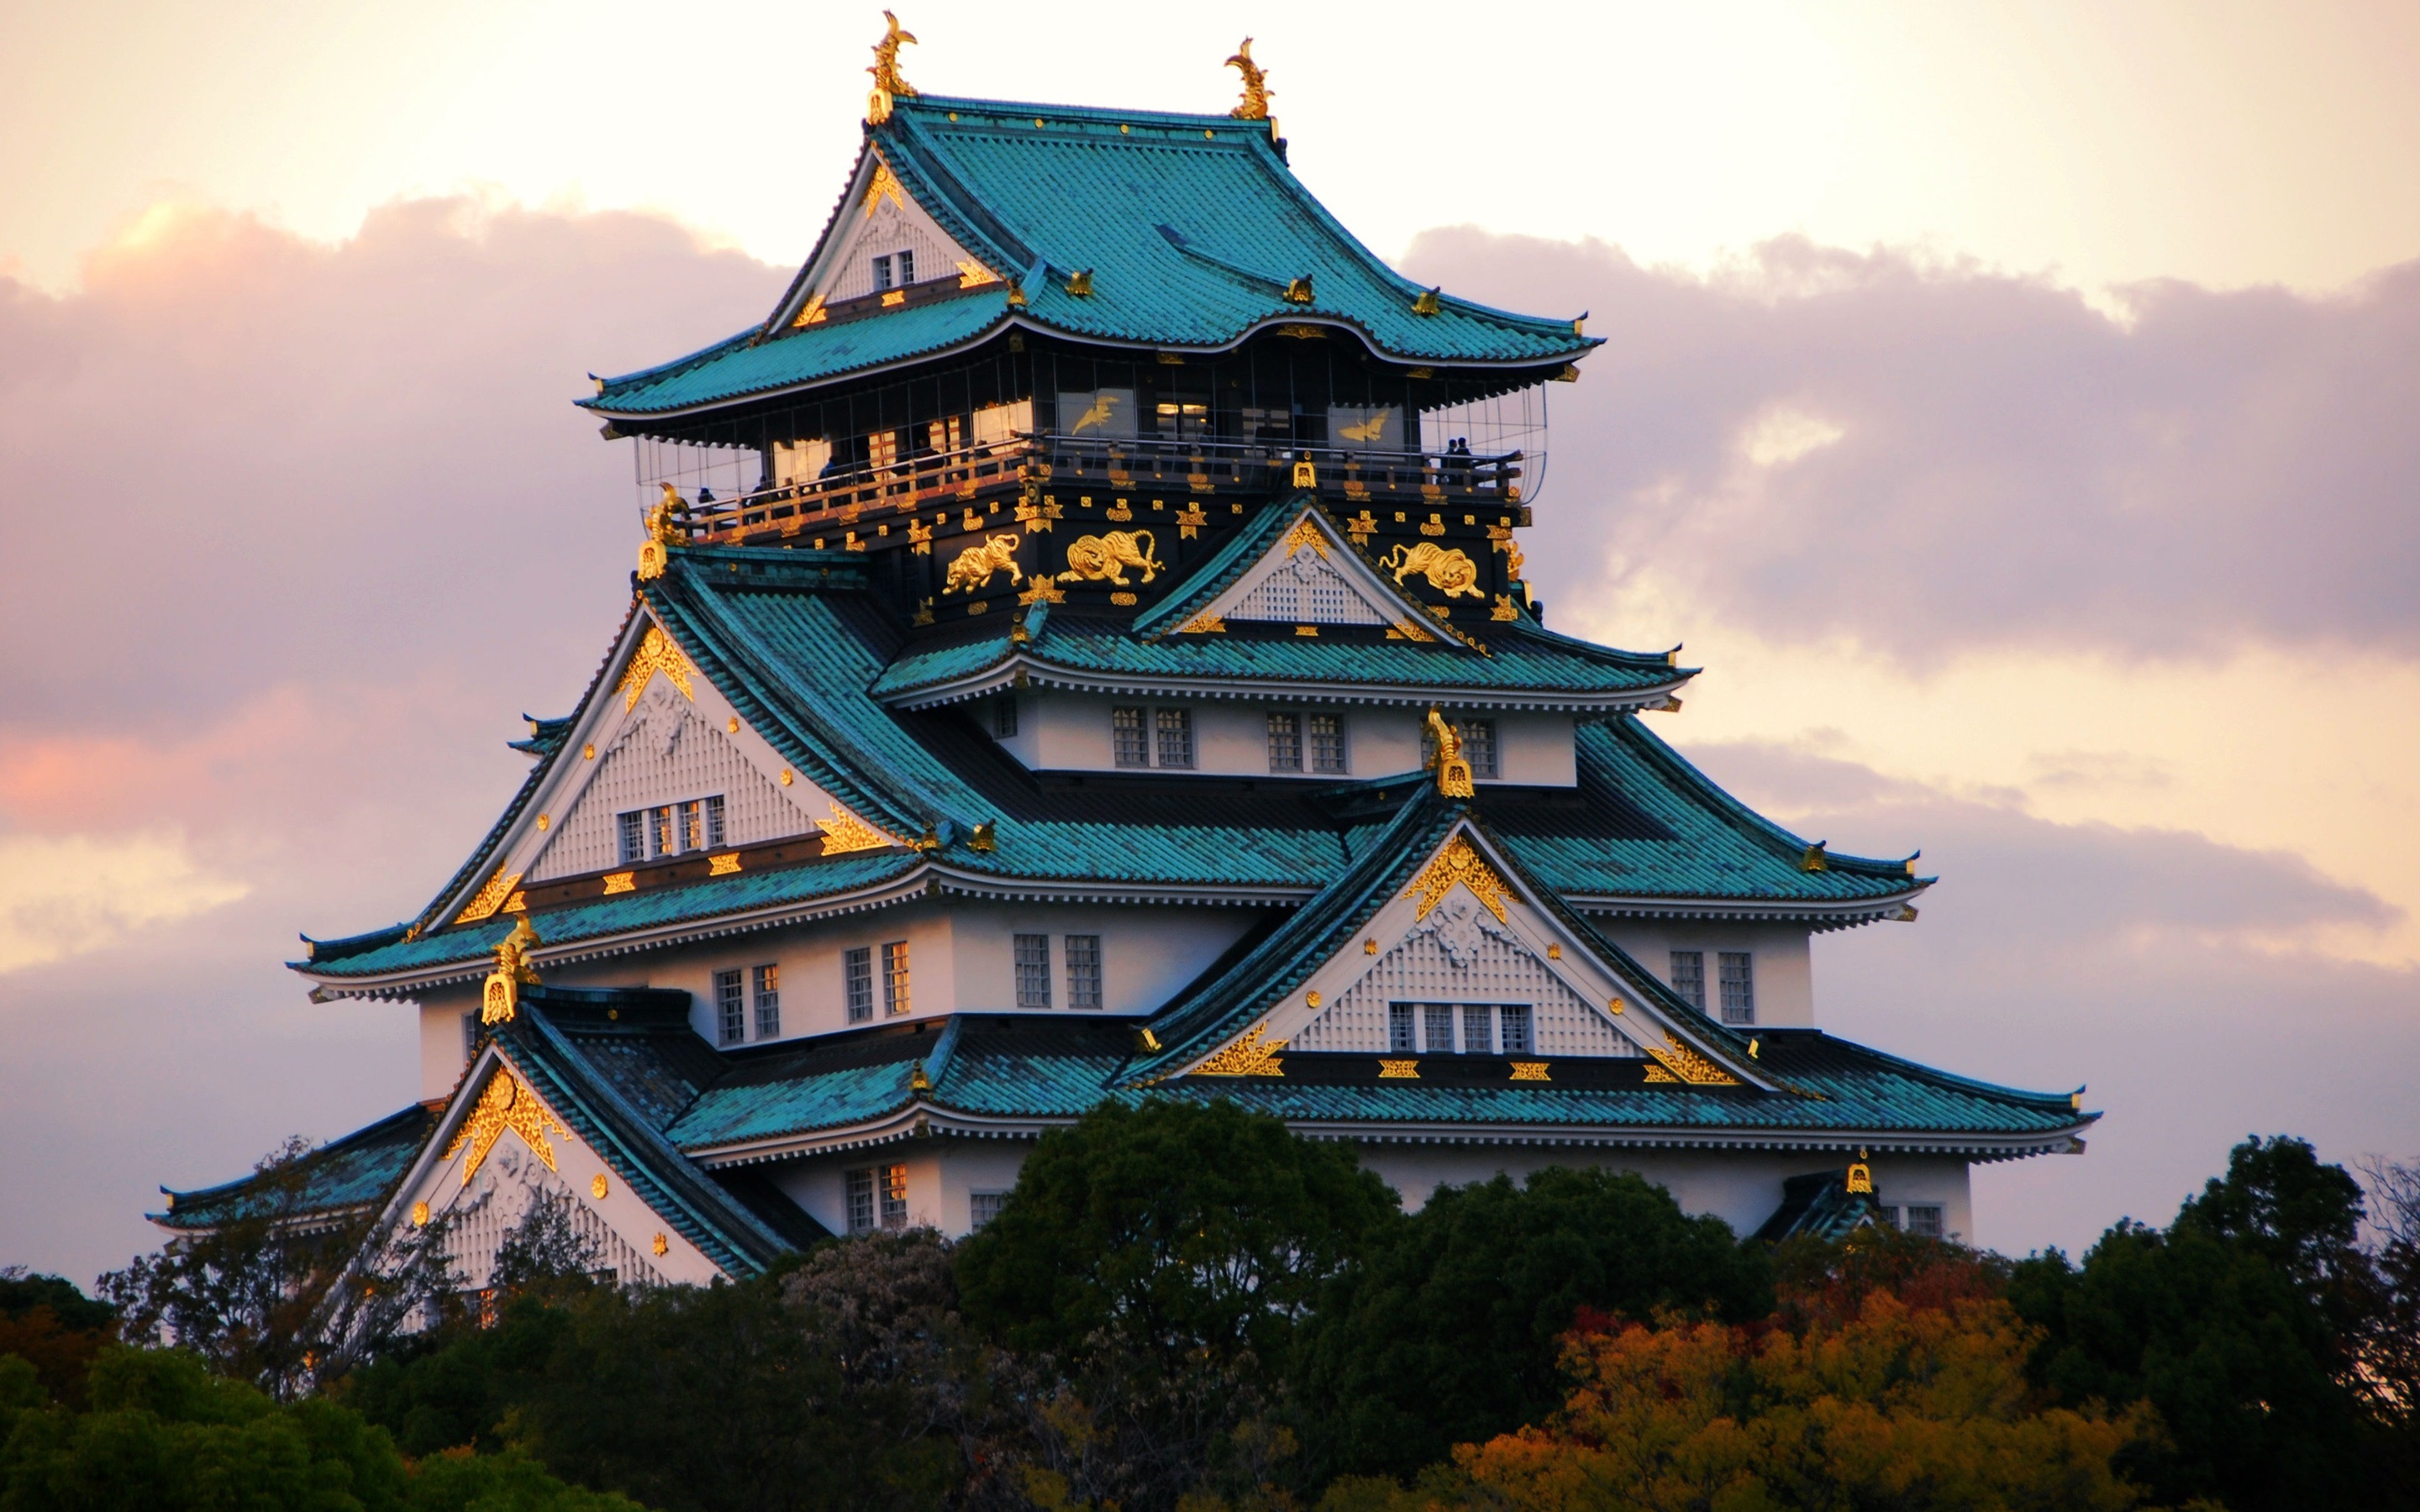 Download This Wallpaper Osaka Castle Hd Wallpaper Backgrounds Download